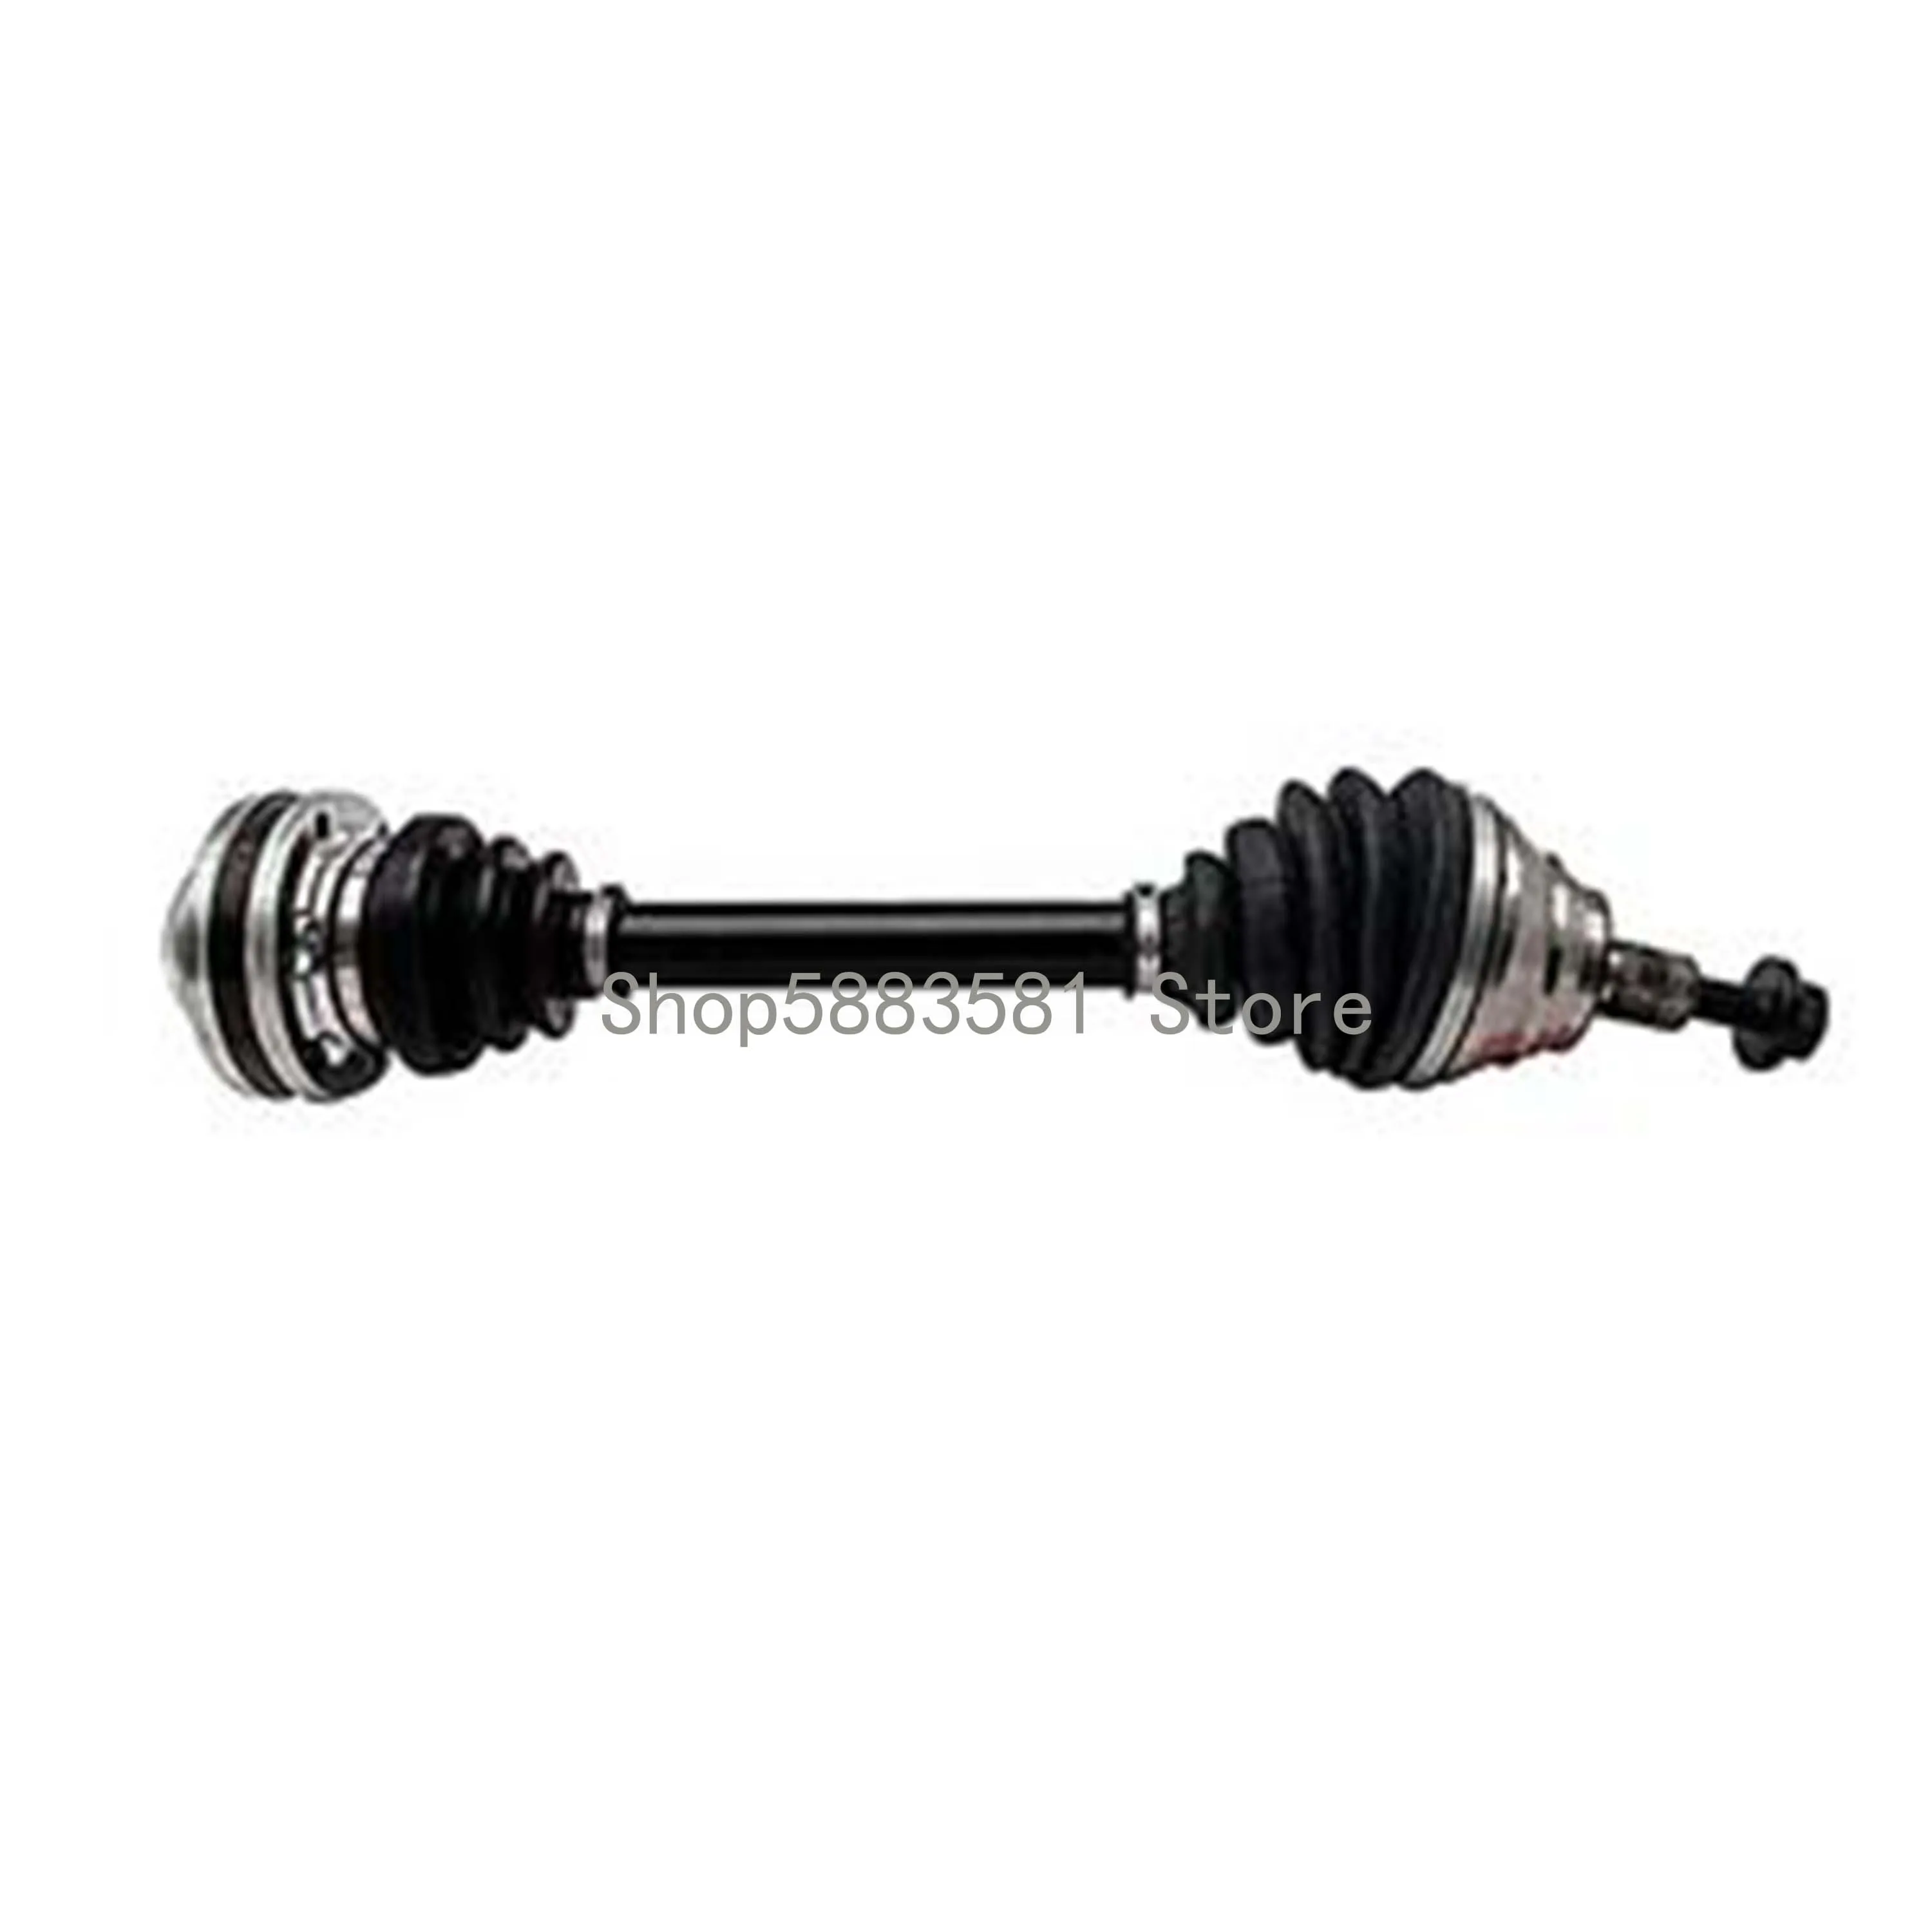 

CAR Swing half shaft with constant velocity universal joint Vol ksw age nPa ssa t Drive shaft front CSSA D 23 11 2015